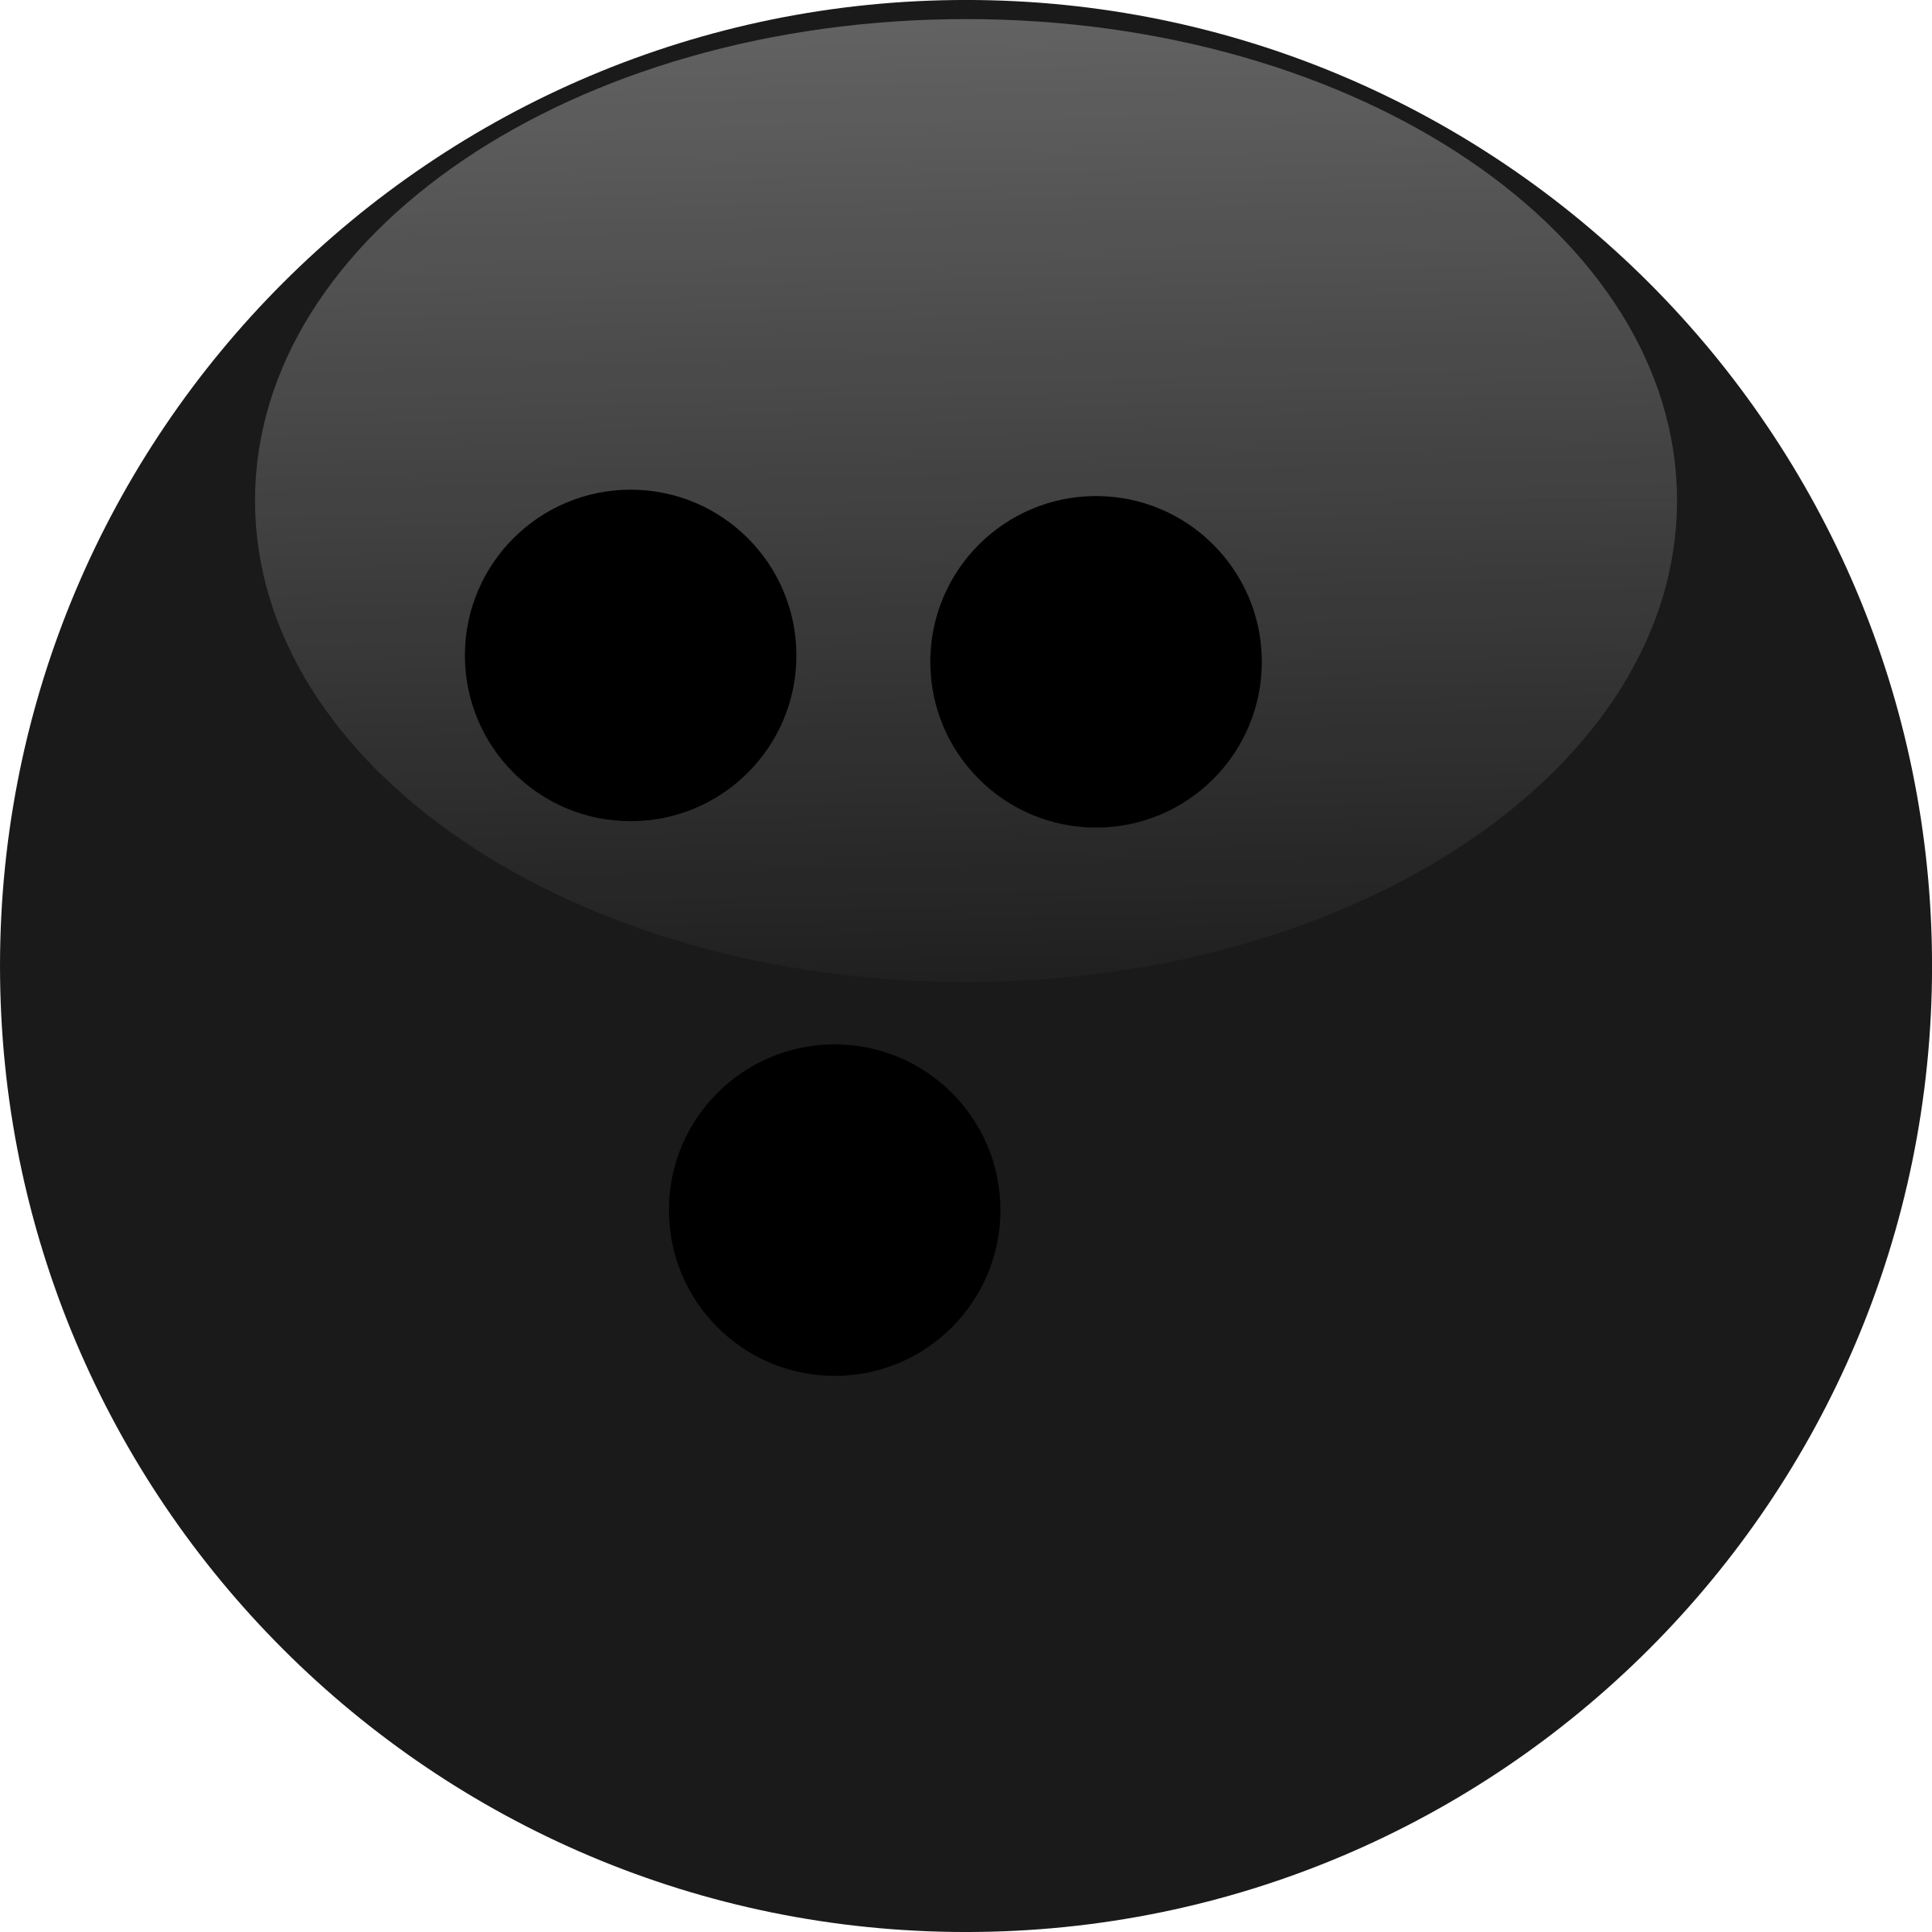 A Black Ball With Holes